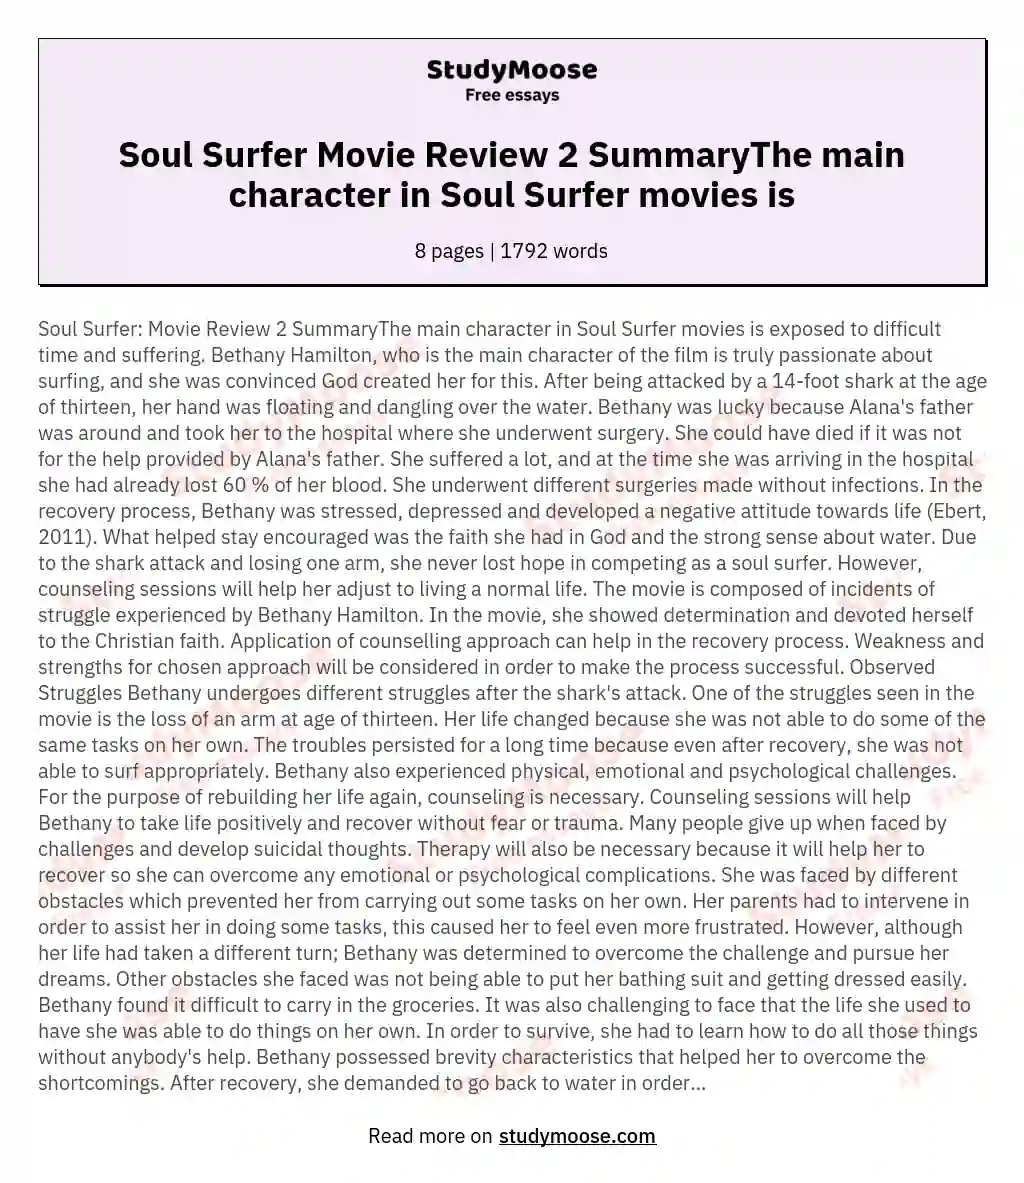 Soul Surfer Movie Review 2 SummaryThe main character in Soul Surfer movies is